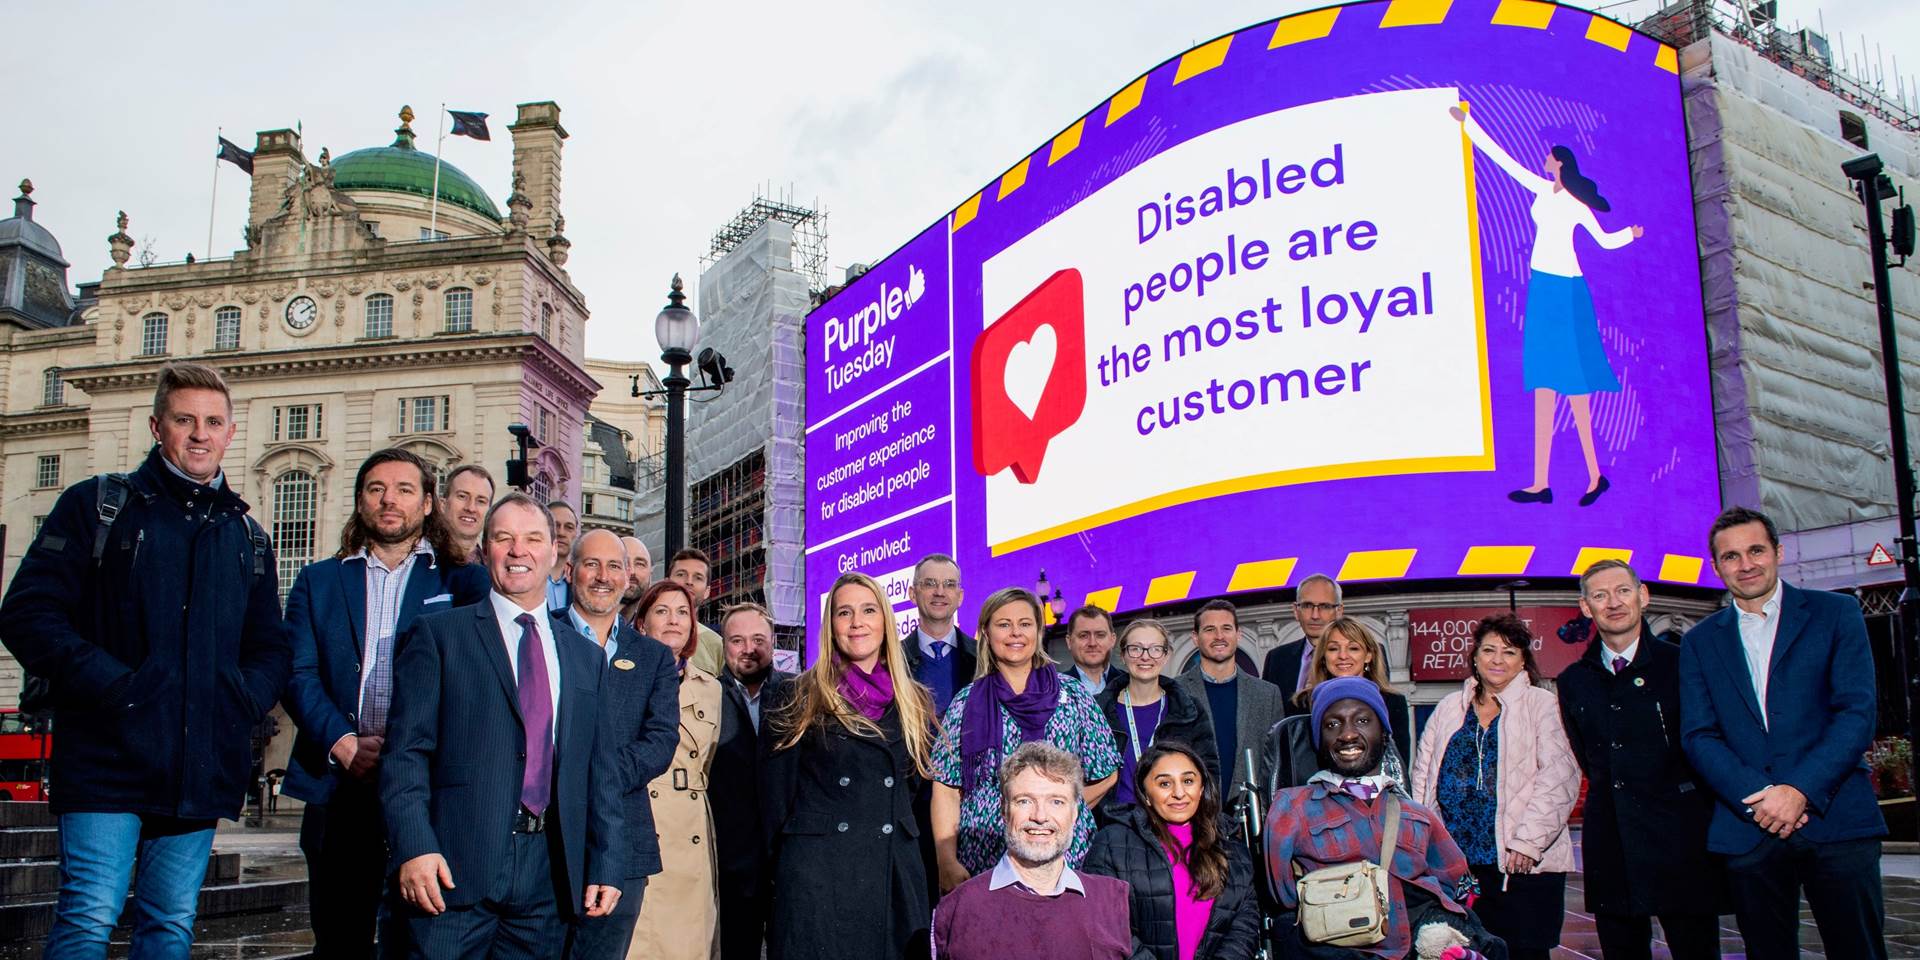 A group photo taken in front of the Piccadilly Lights featuring the sponsors of Purple Tuesday 2022, Purple Tuesday CEO Mike Adams, and Purple Tuesday ambassadors. The individuals are posing together, with the Piccadilly Lights prominently displaying the 